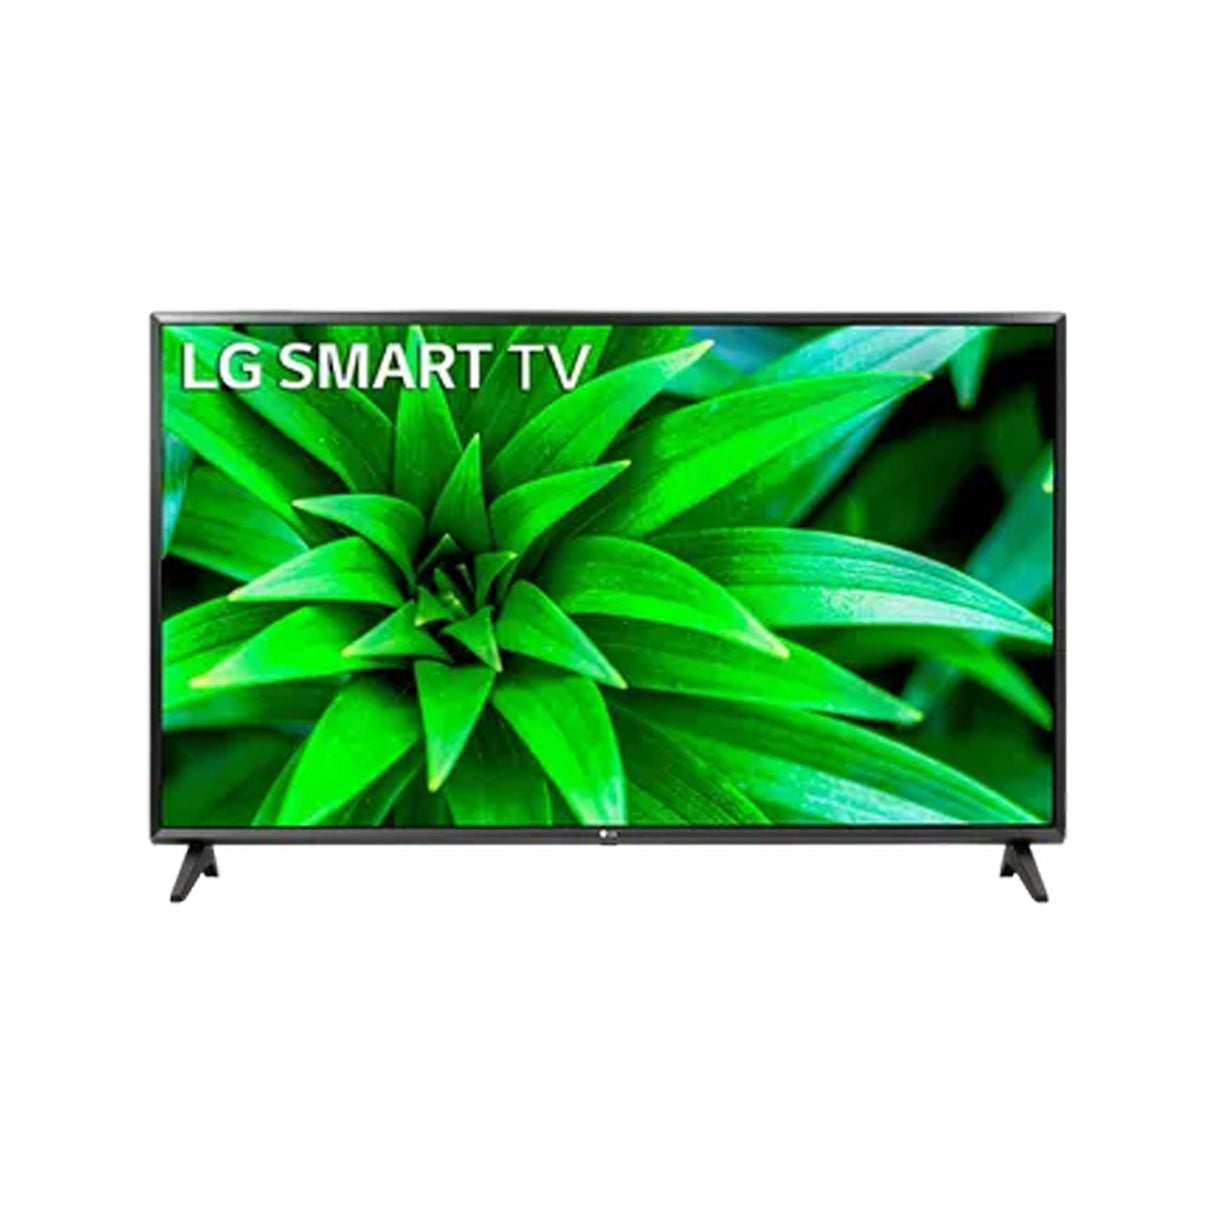 LG All-in-One 80cm (32 inch) HD Ready LED Smart TV (32LM560BPTC) - Black